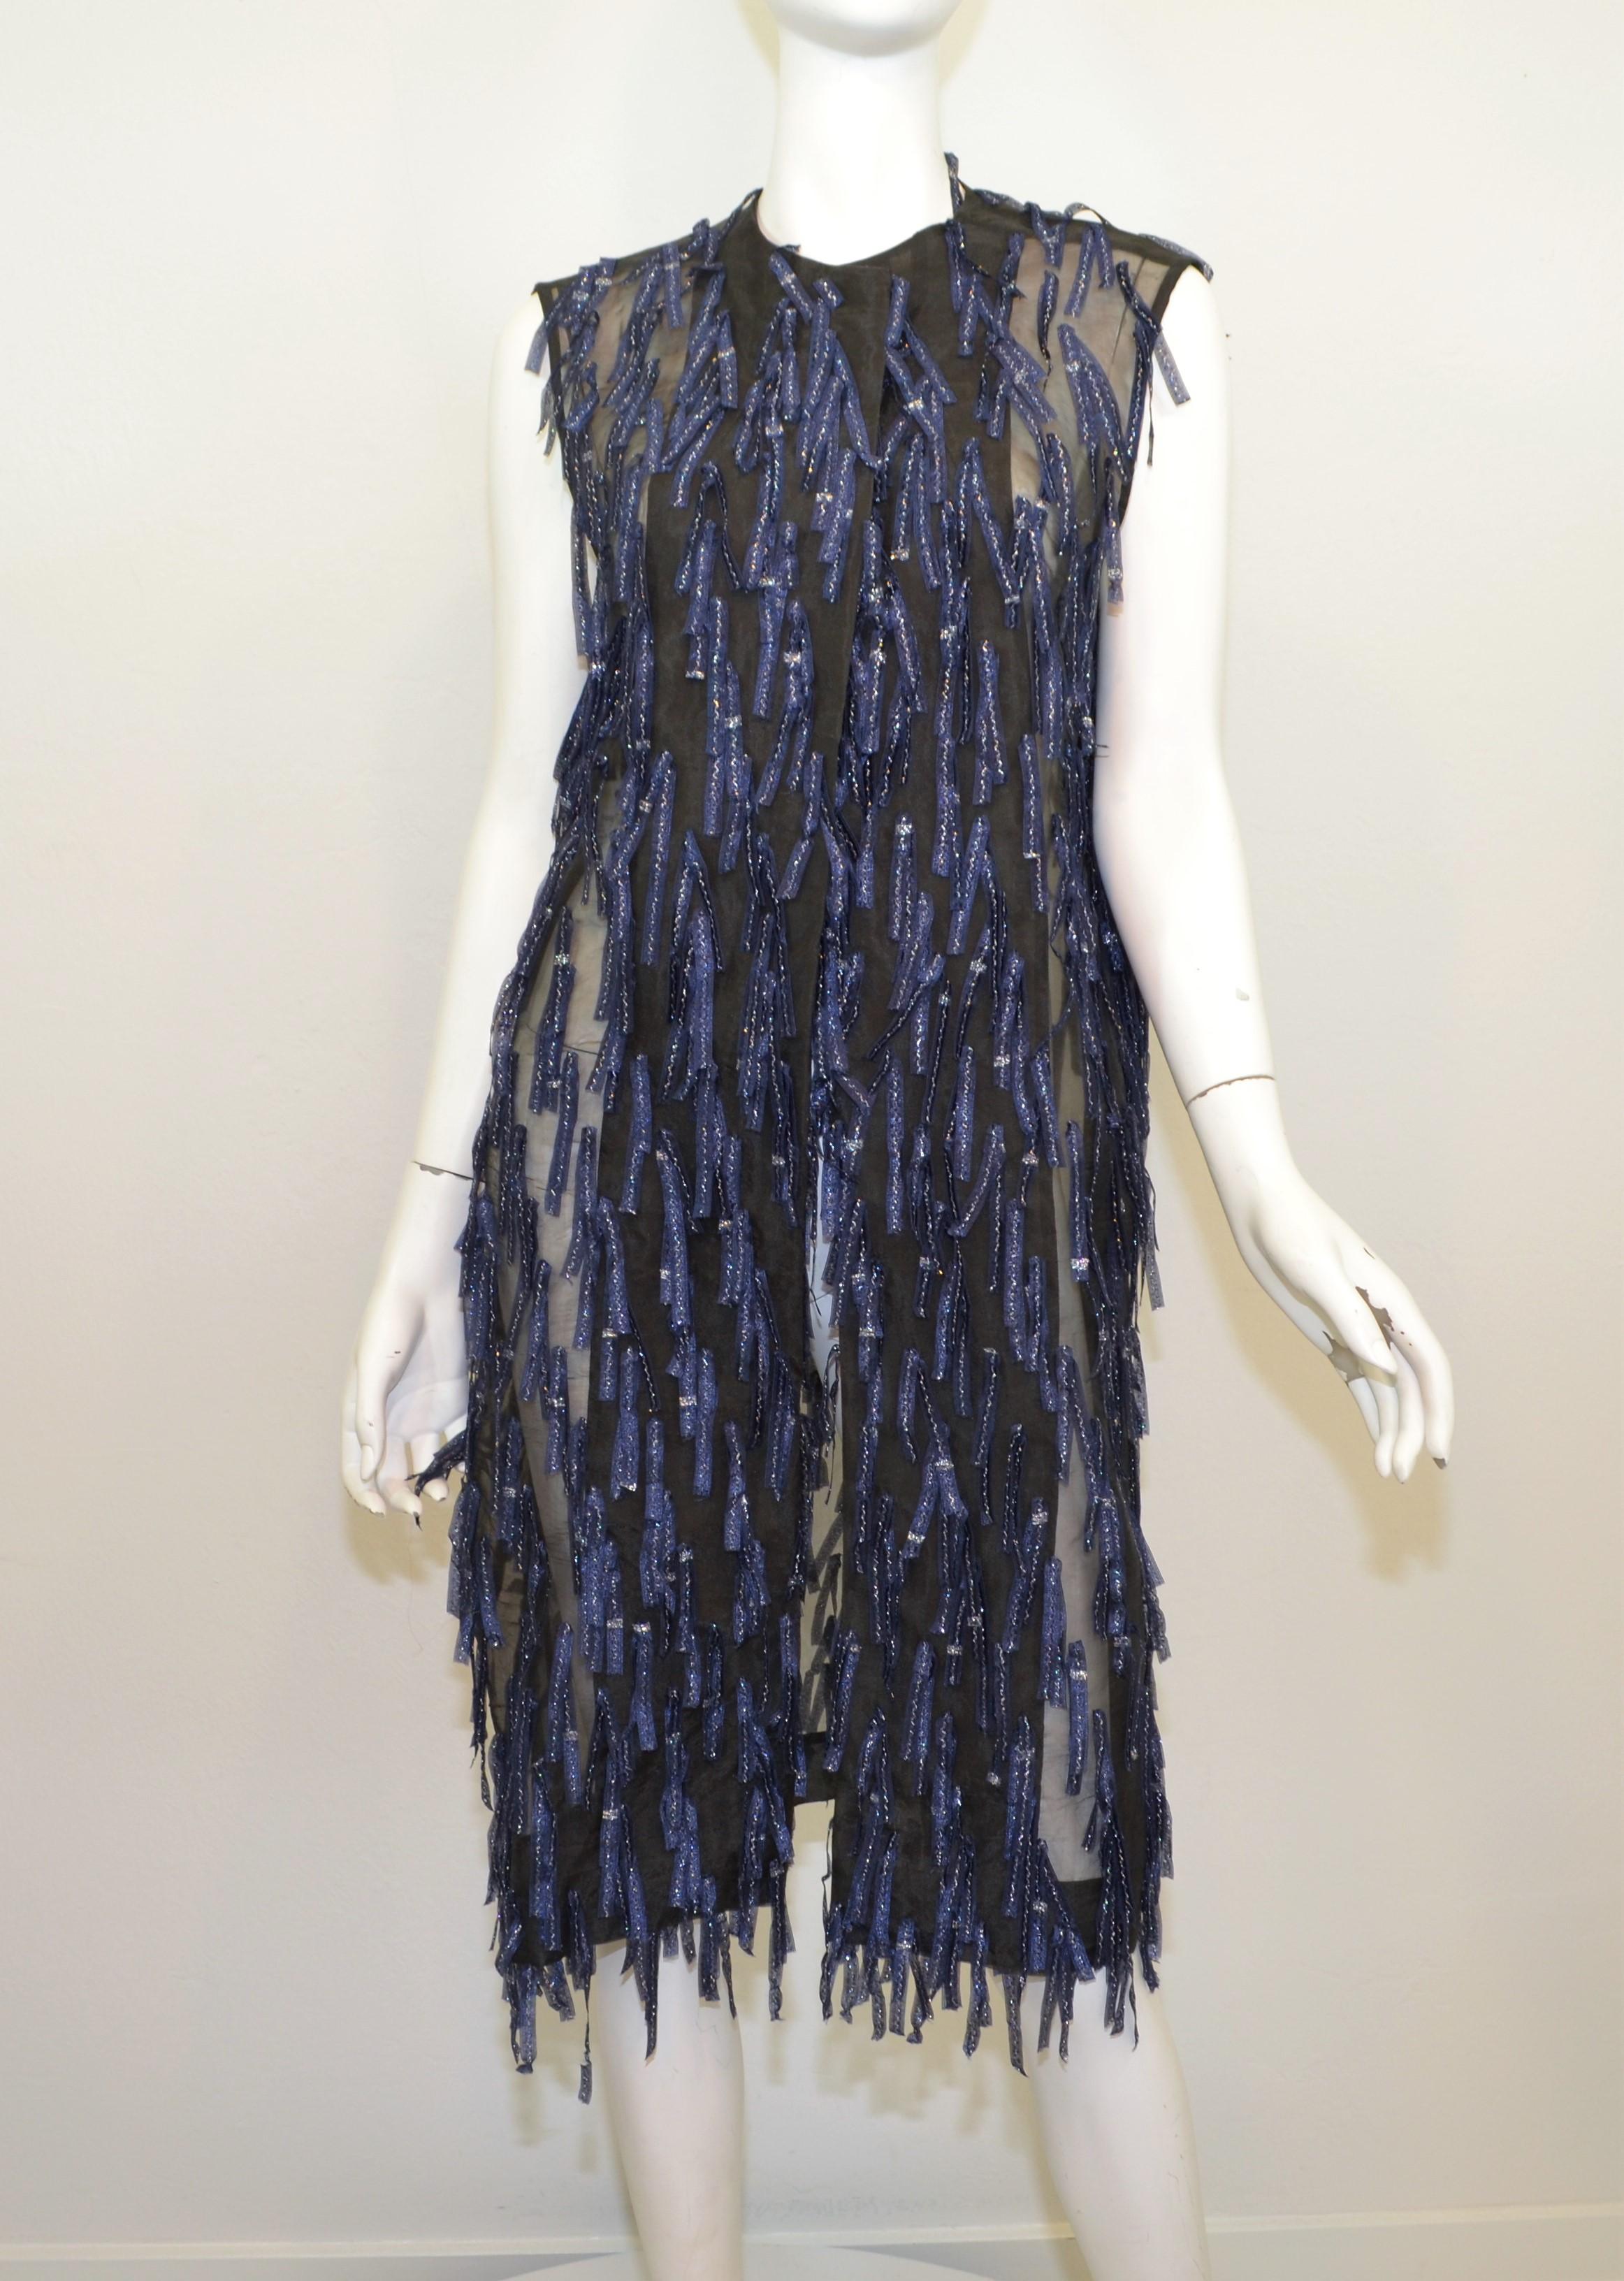 Dries Van Noten sleeveless coat is featured in a black organza fabric with navy blue and silver fringed applique allover. Coat has an open front and is labeled a size 40, made in Belgium. 

Measurements:
Bust - 42''
Length - 40''